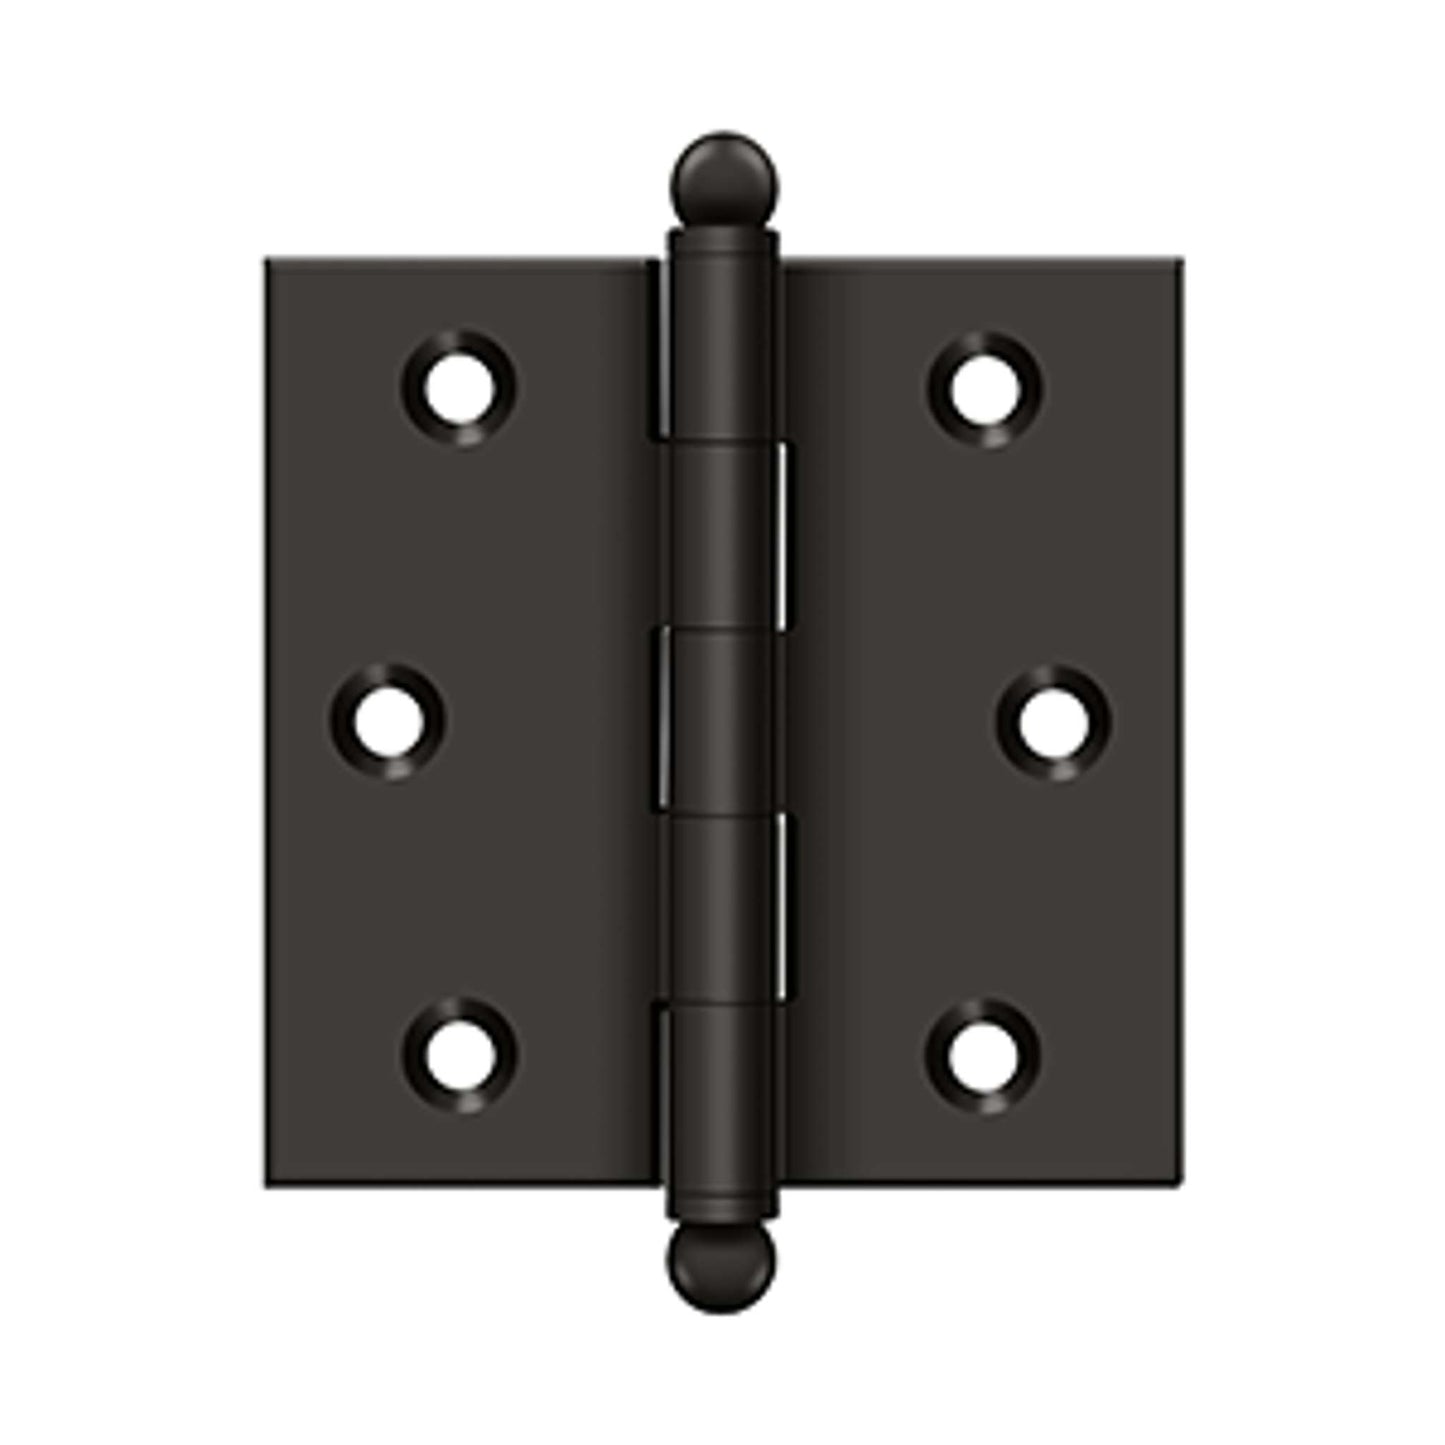 Deltana - 2-1/2" x 2-1/2" Hinge, w/ Ball Tips, Specialty Solid Brass